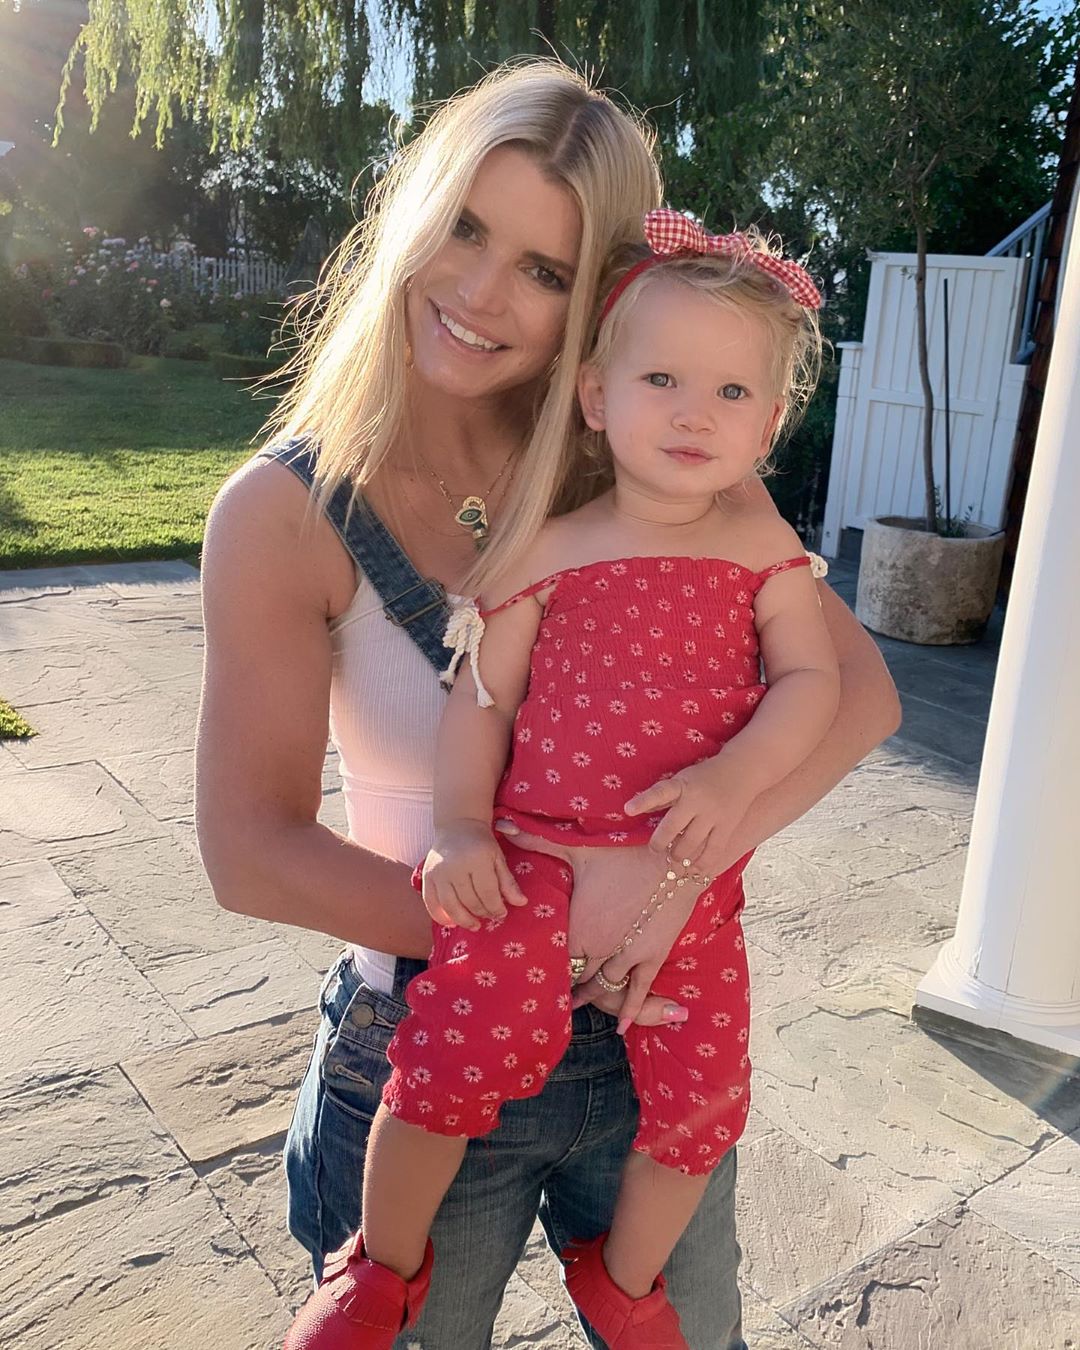 Jessica Simpson Criticized for Posting Instagram Photo of Her Daughter